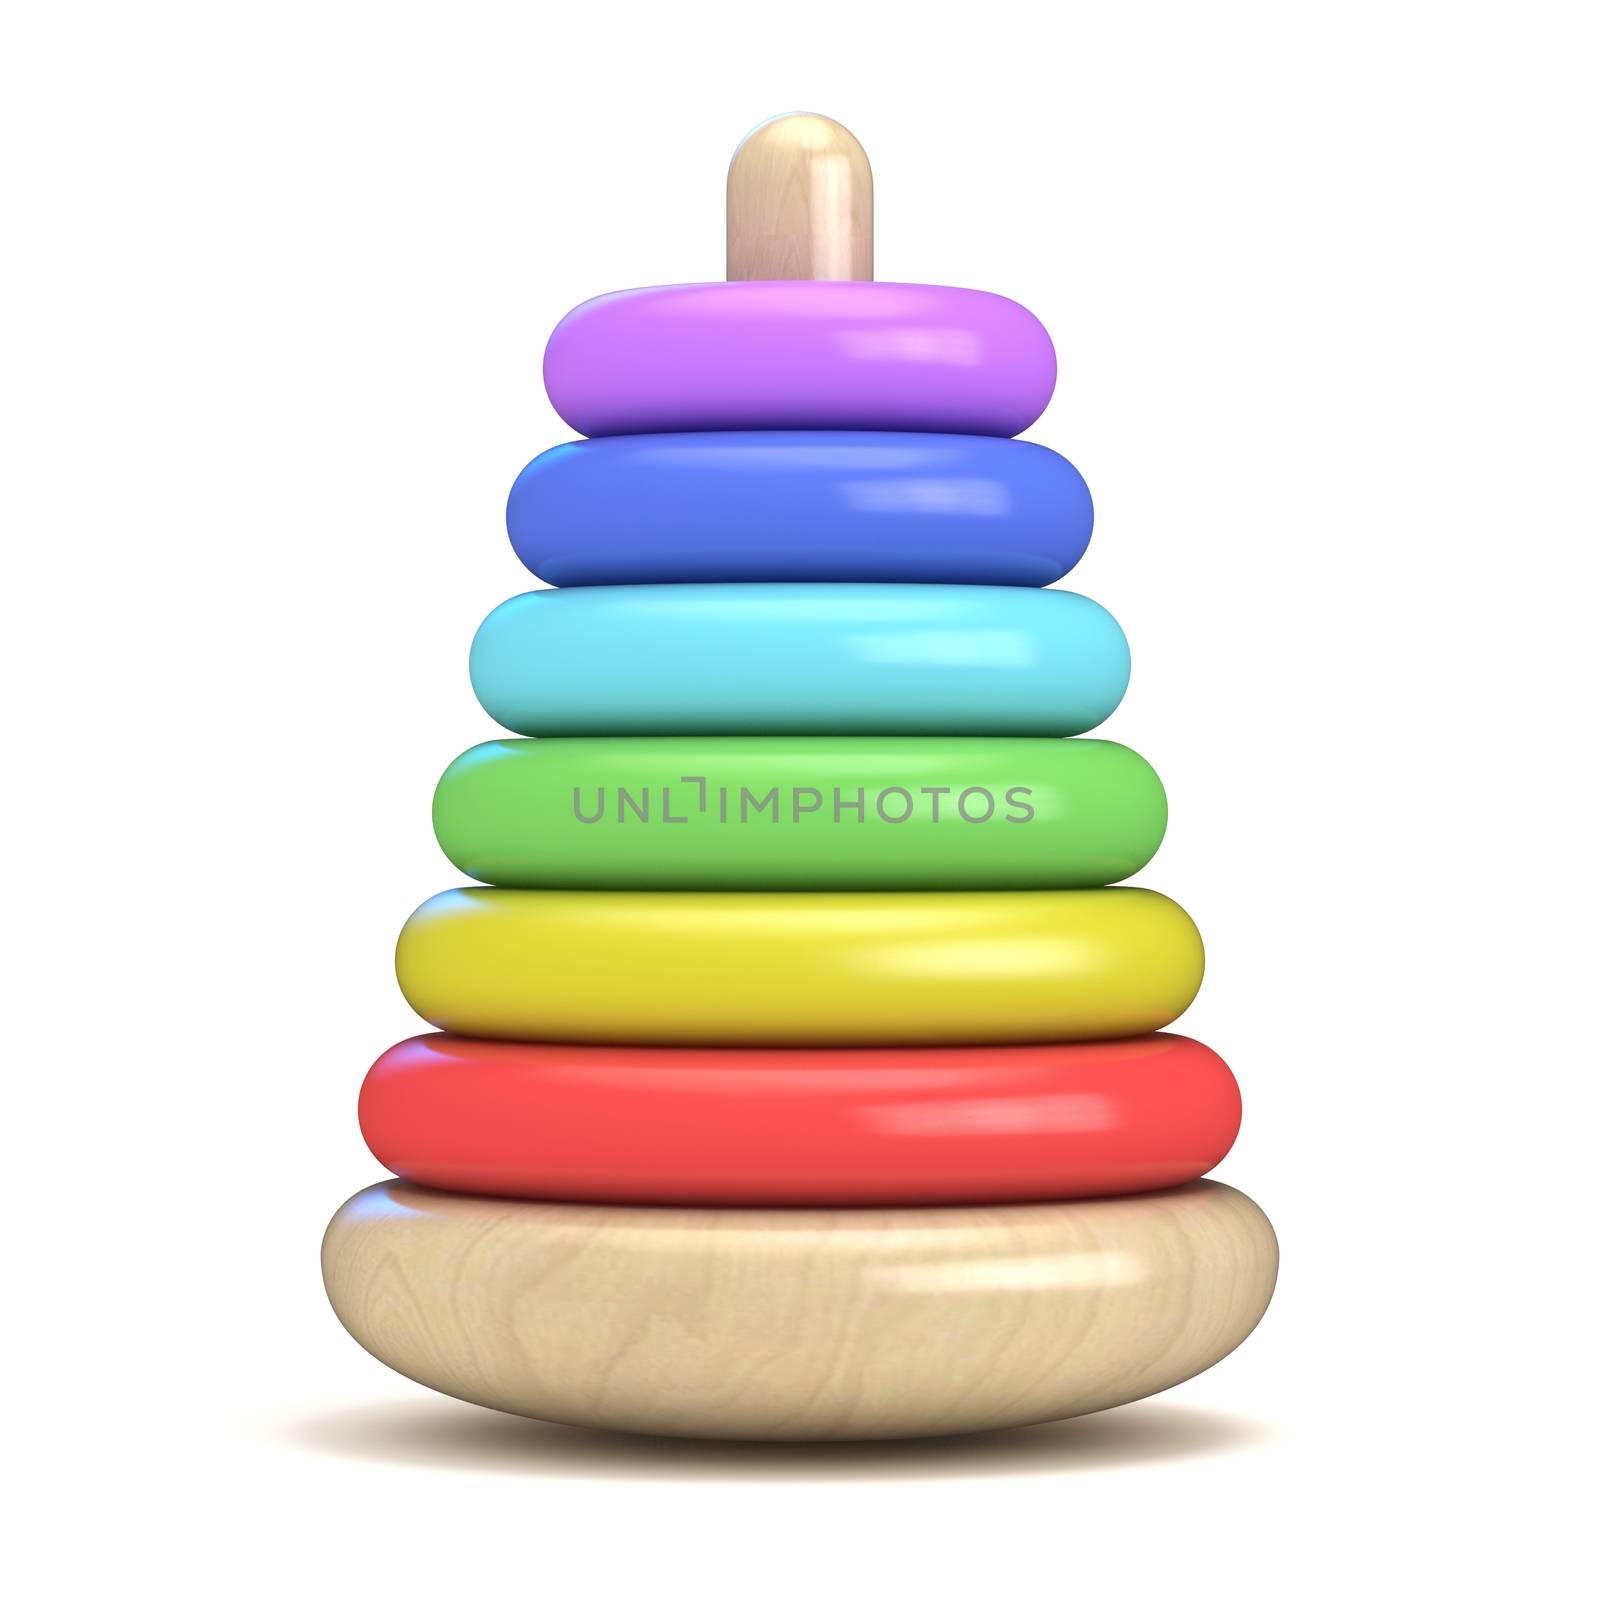 Pyramid build from colored wooden rings. Colorful wooden toy. 3D render illustration isolated on white background